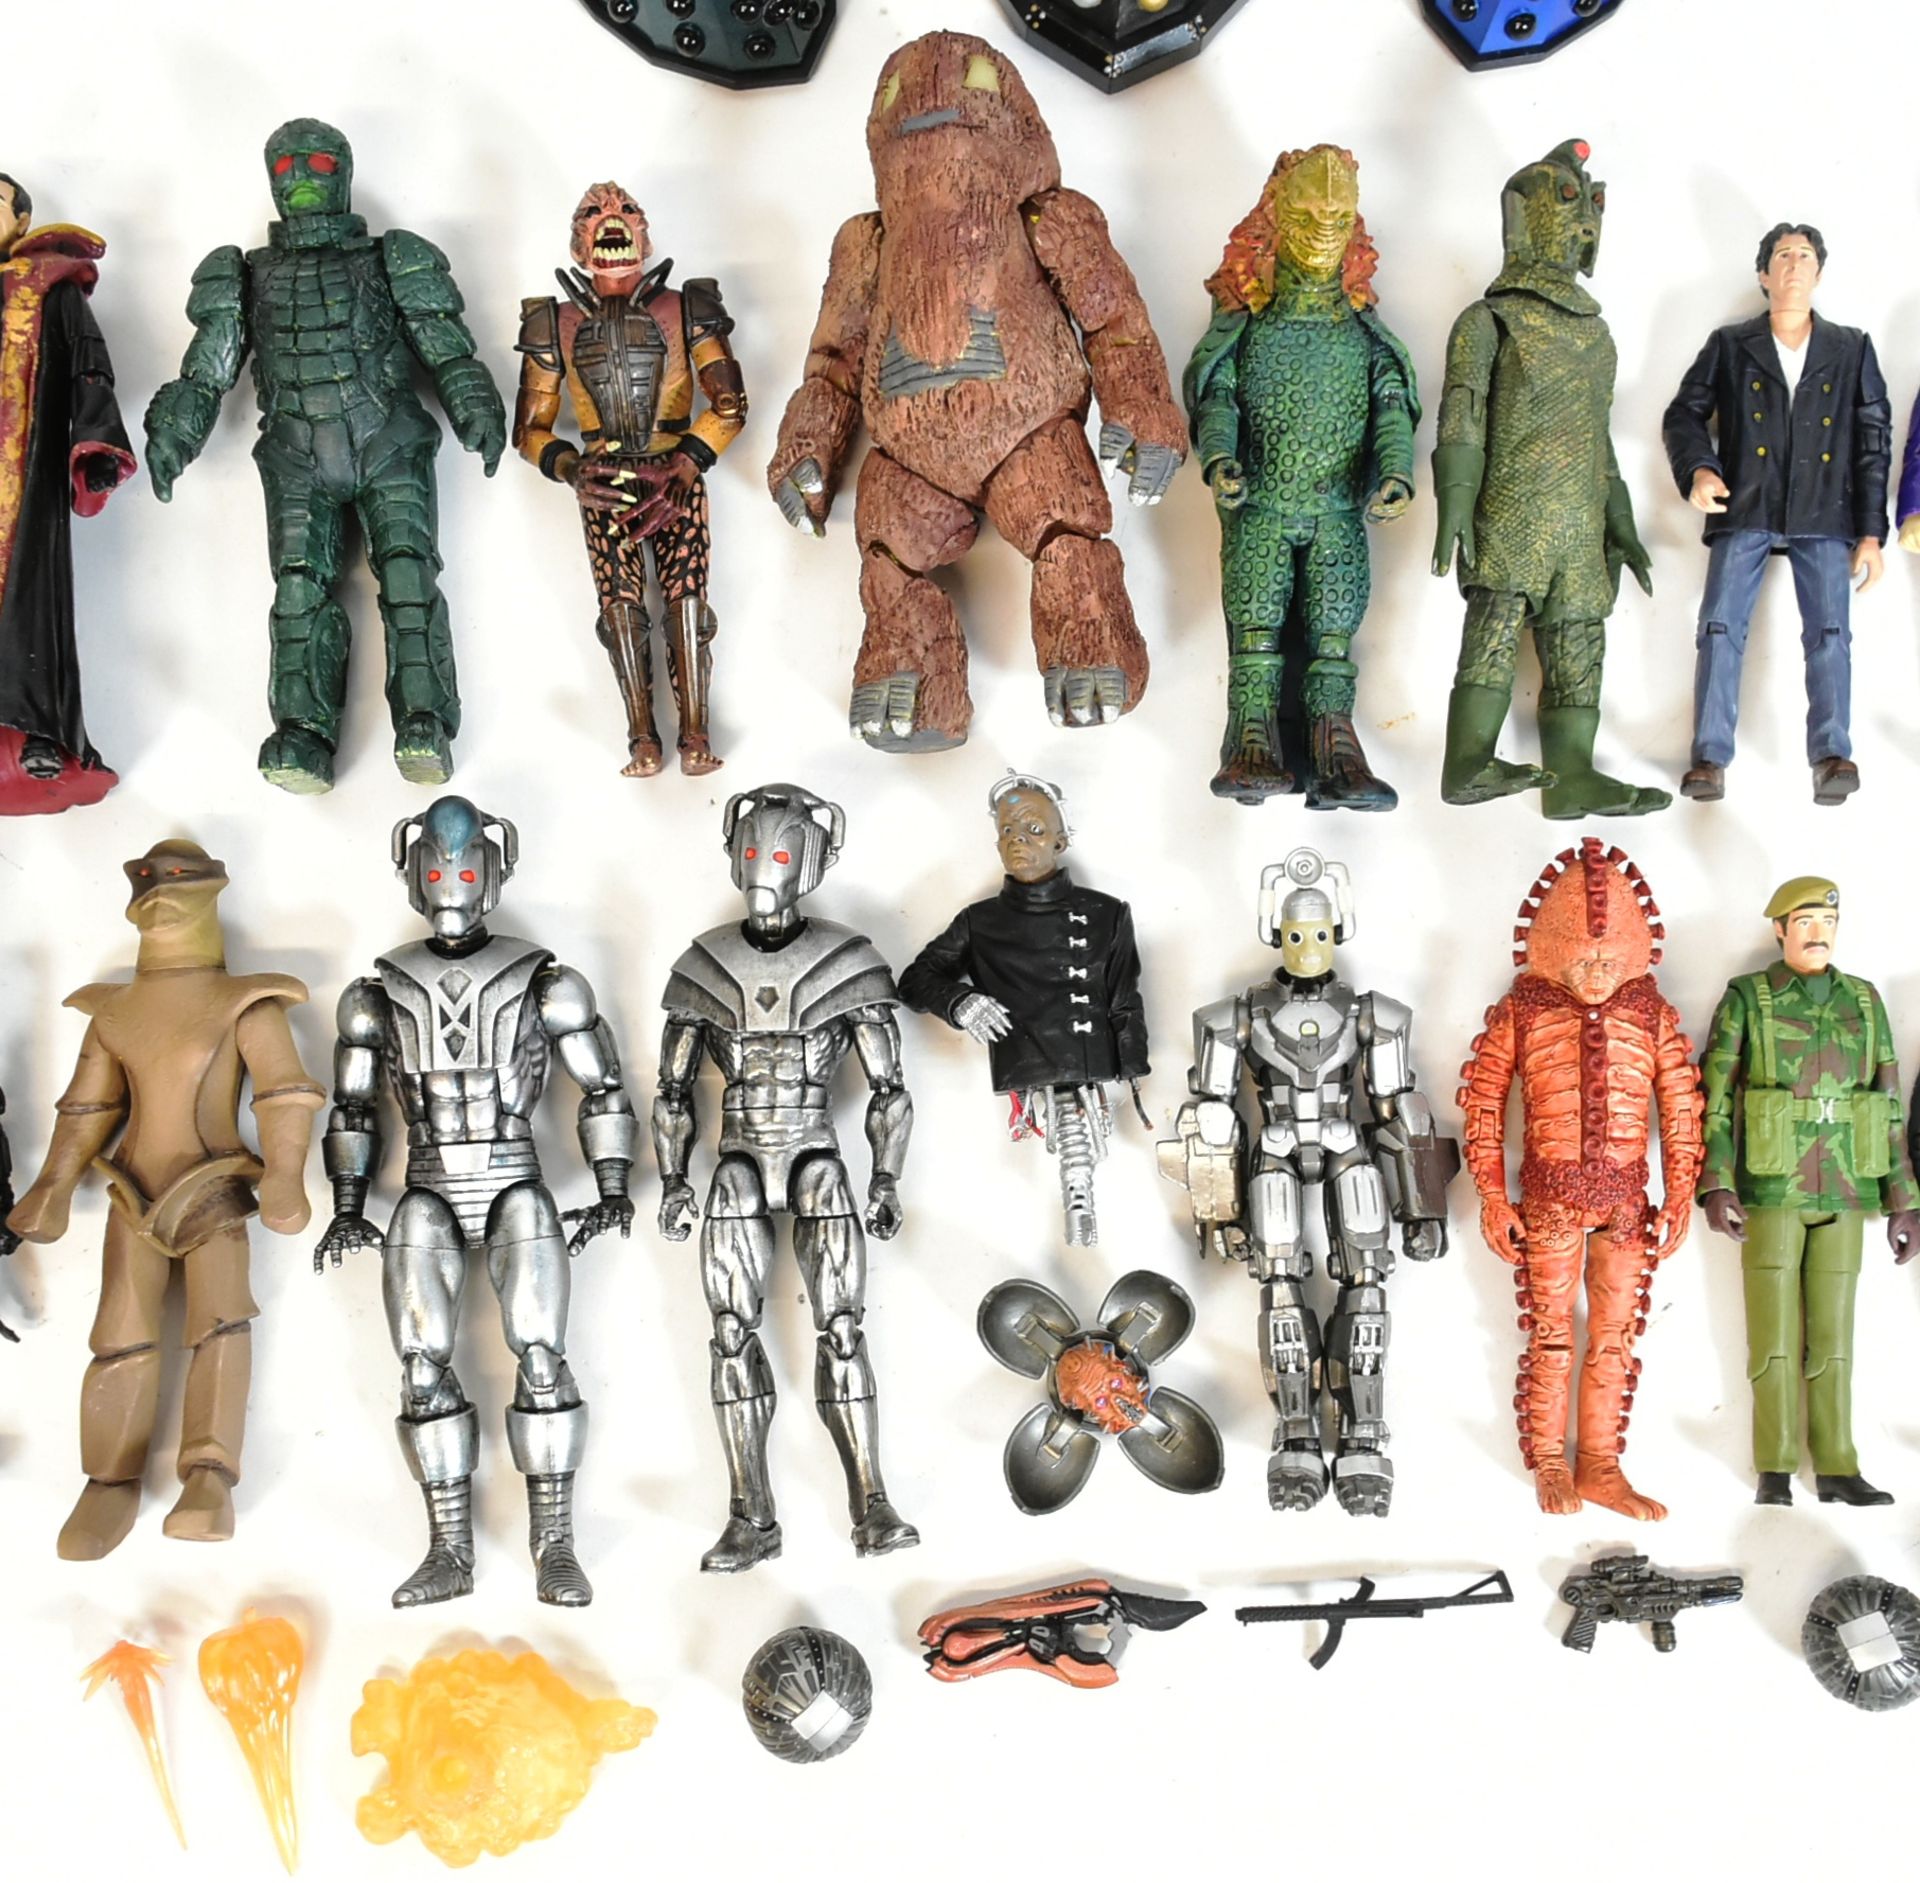 DOCTOR WHO - ACTION FIGURES - 'NEW WHO' & CLASSIC WHO - Image 4 of 5